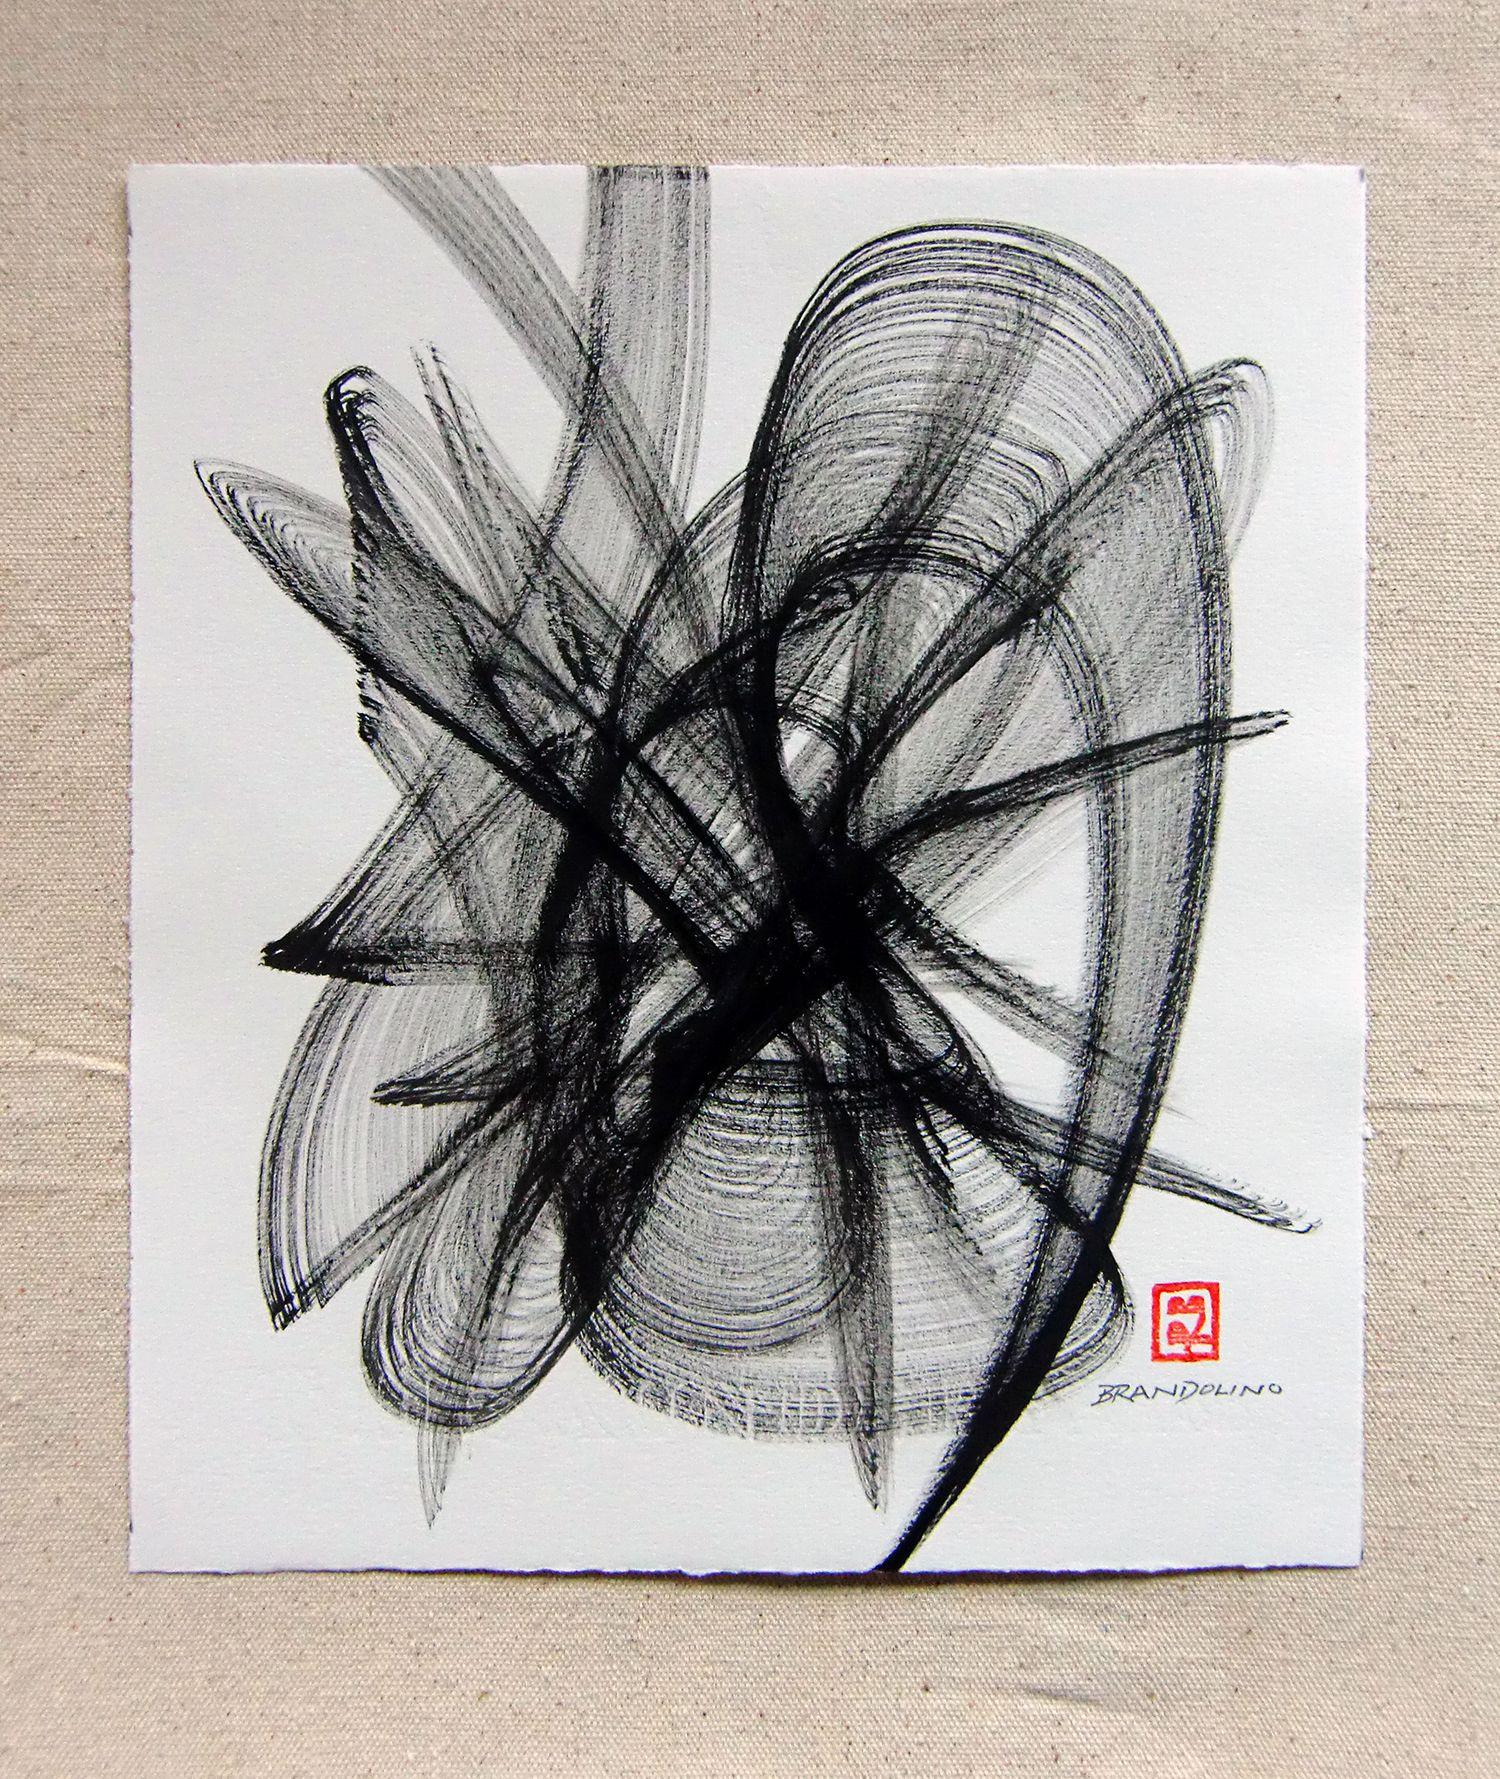 Brush Dance Series No. 05, Drawing, Pen & Ink on Paper - Art by Ray Brandolino